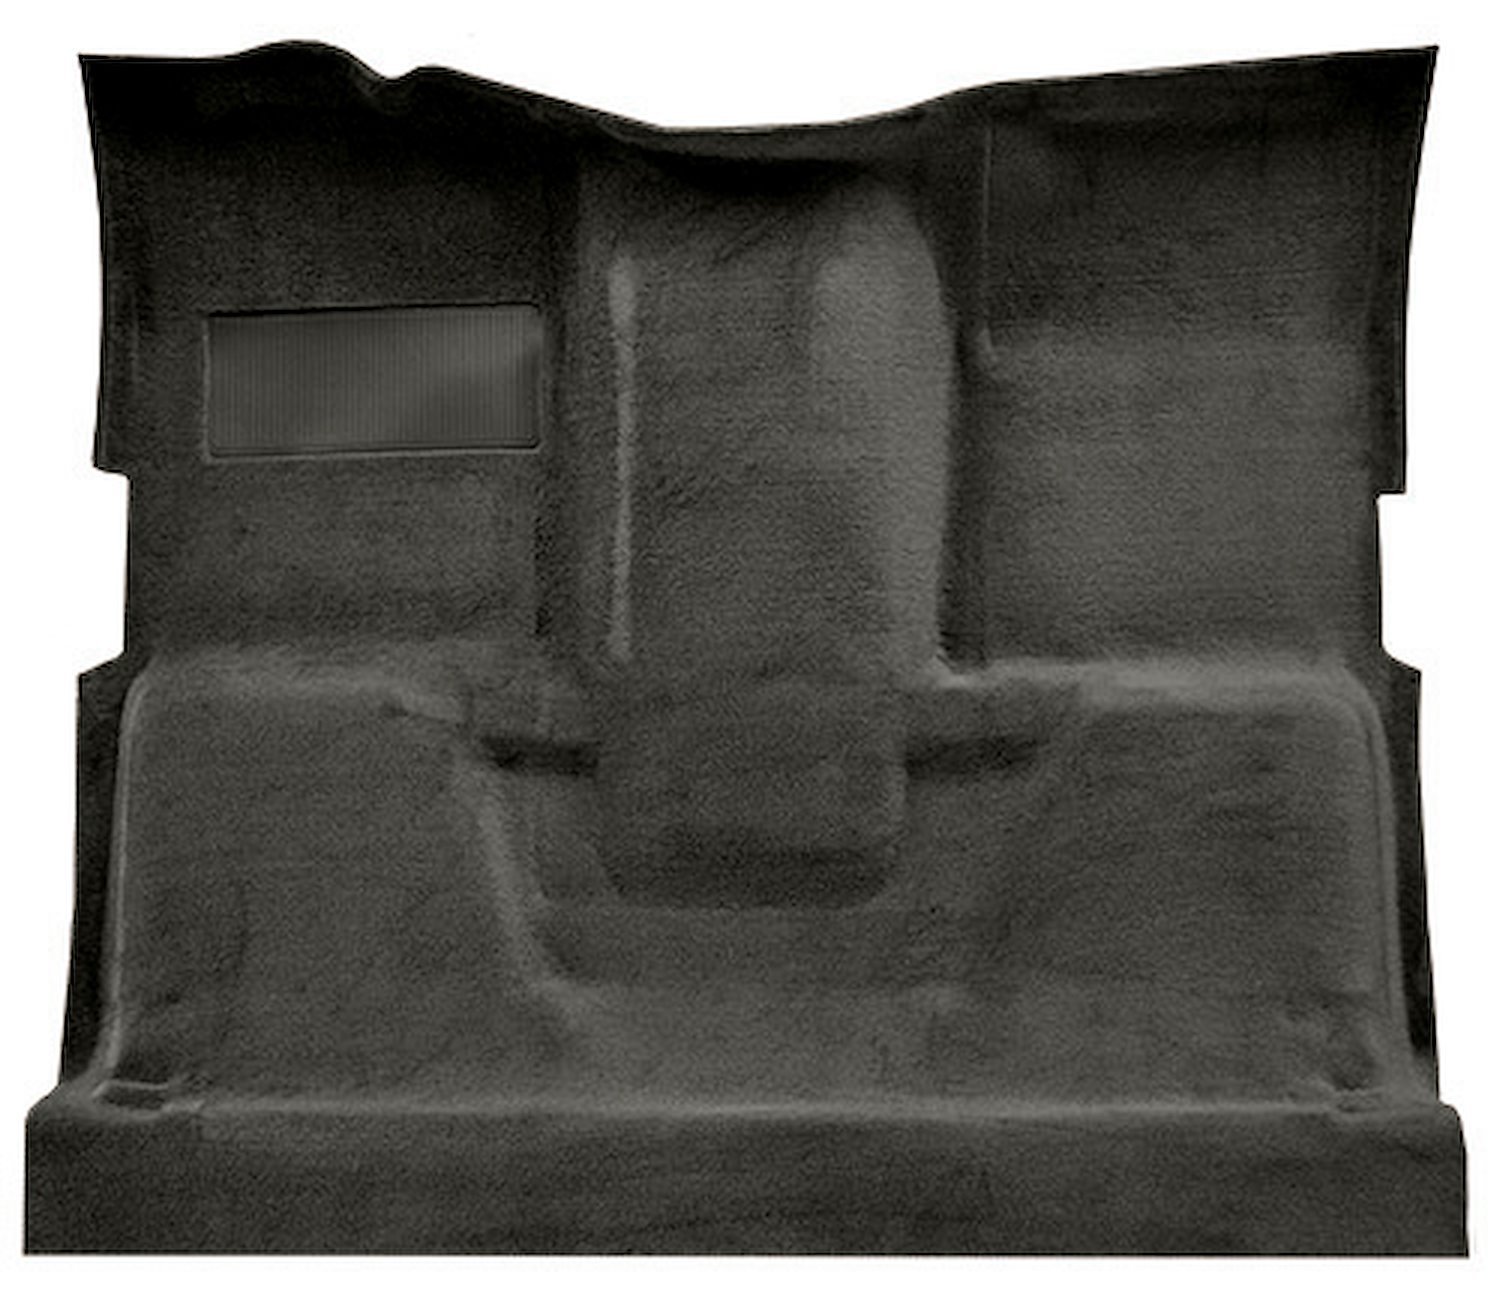 Molded Cut Pile Carpet for 1975-1980 Chevrolet/GMC K Series Truck [Mass Backing, 1-Piece, Charcoal]